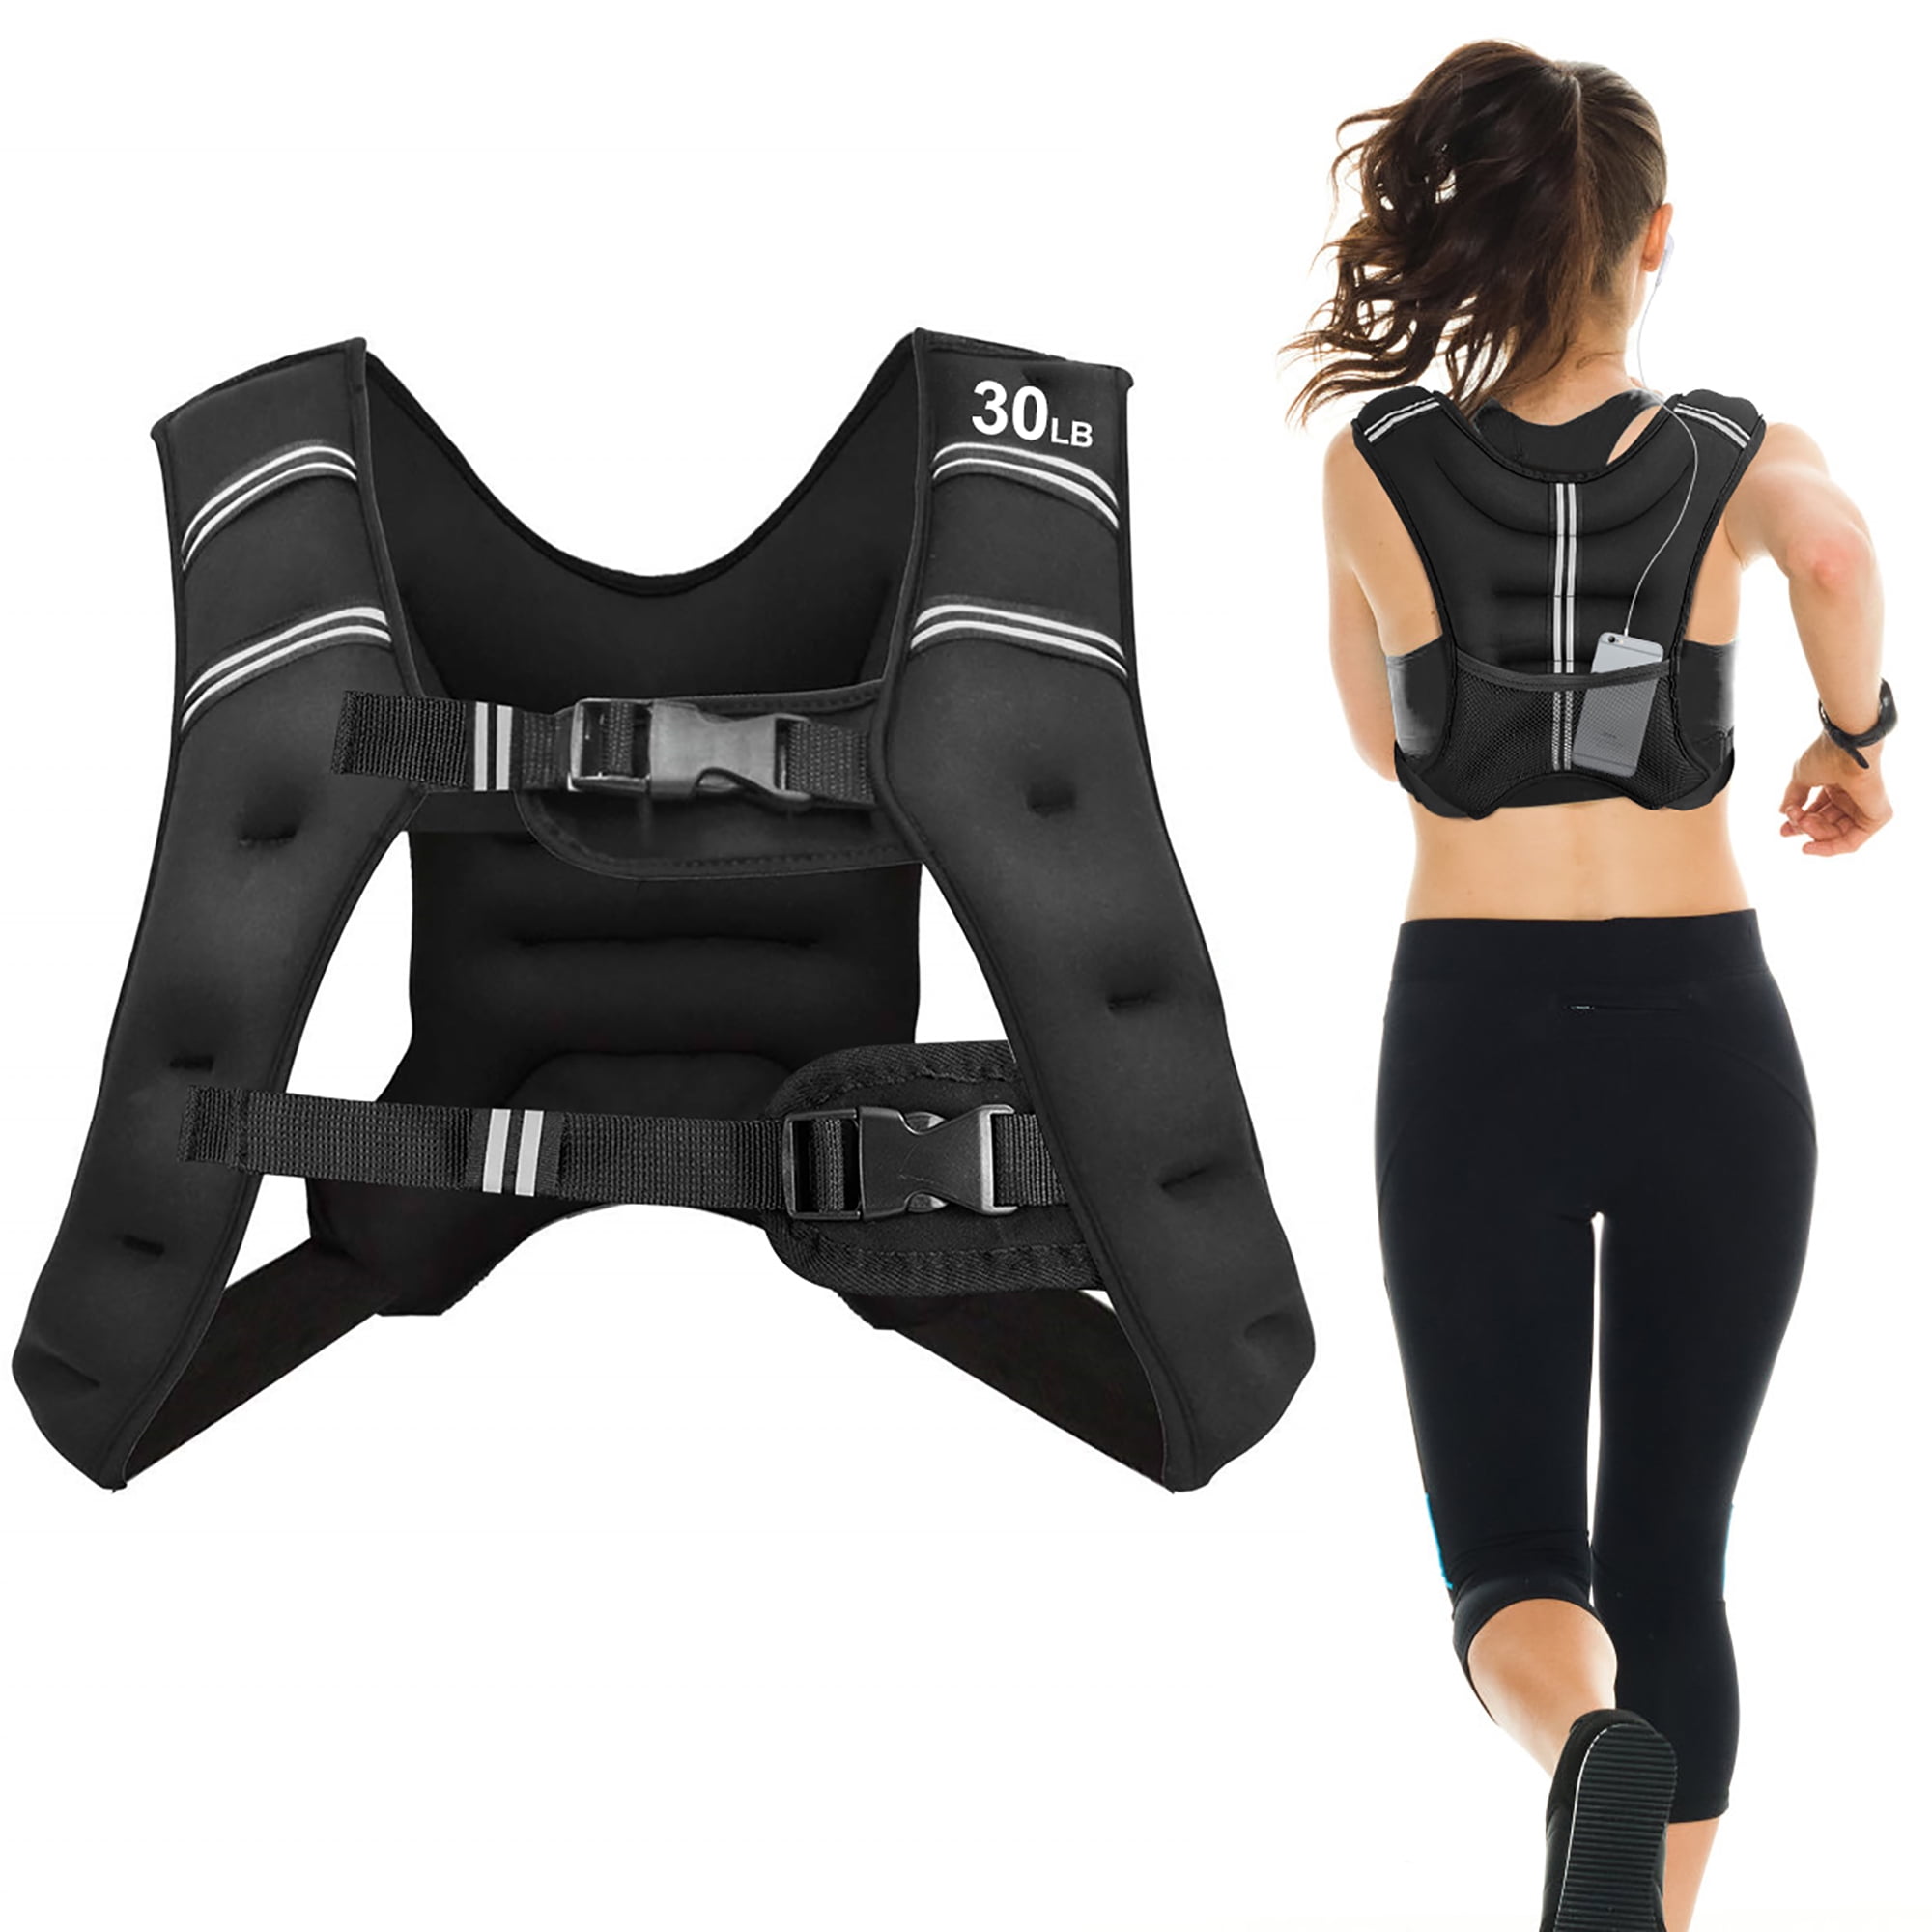 20LBS Workout Weighted Vest W/Mesh Bag Adjustable Buckle Sports Fitness Training 